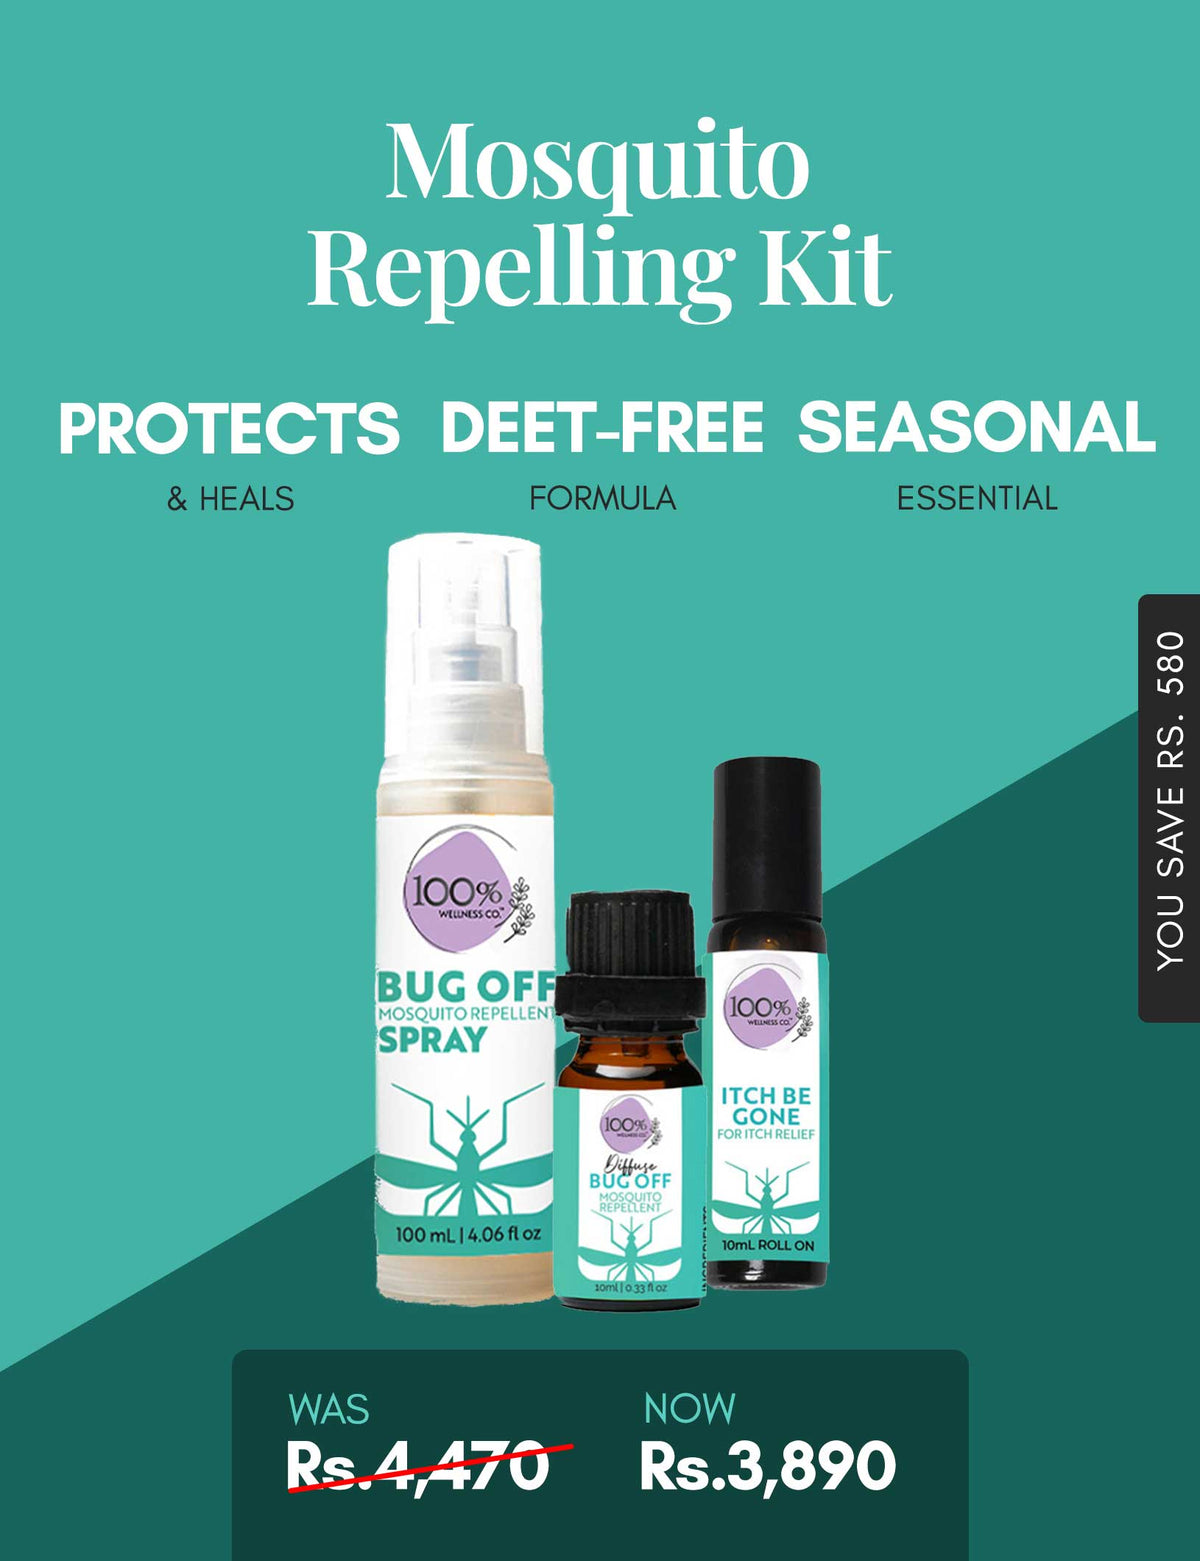 MOSQUITO REPELLING KIT